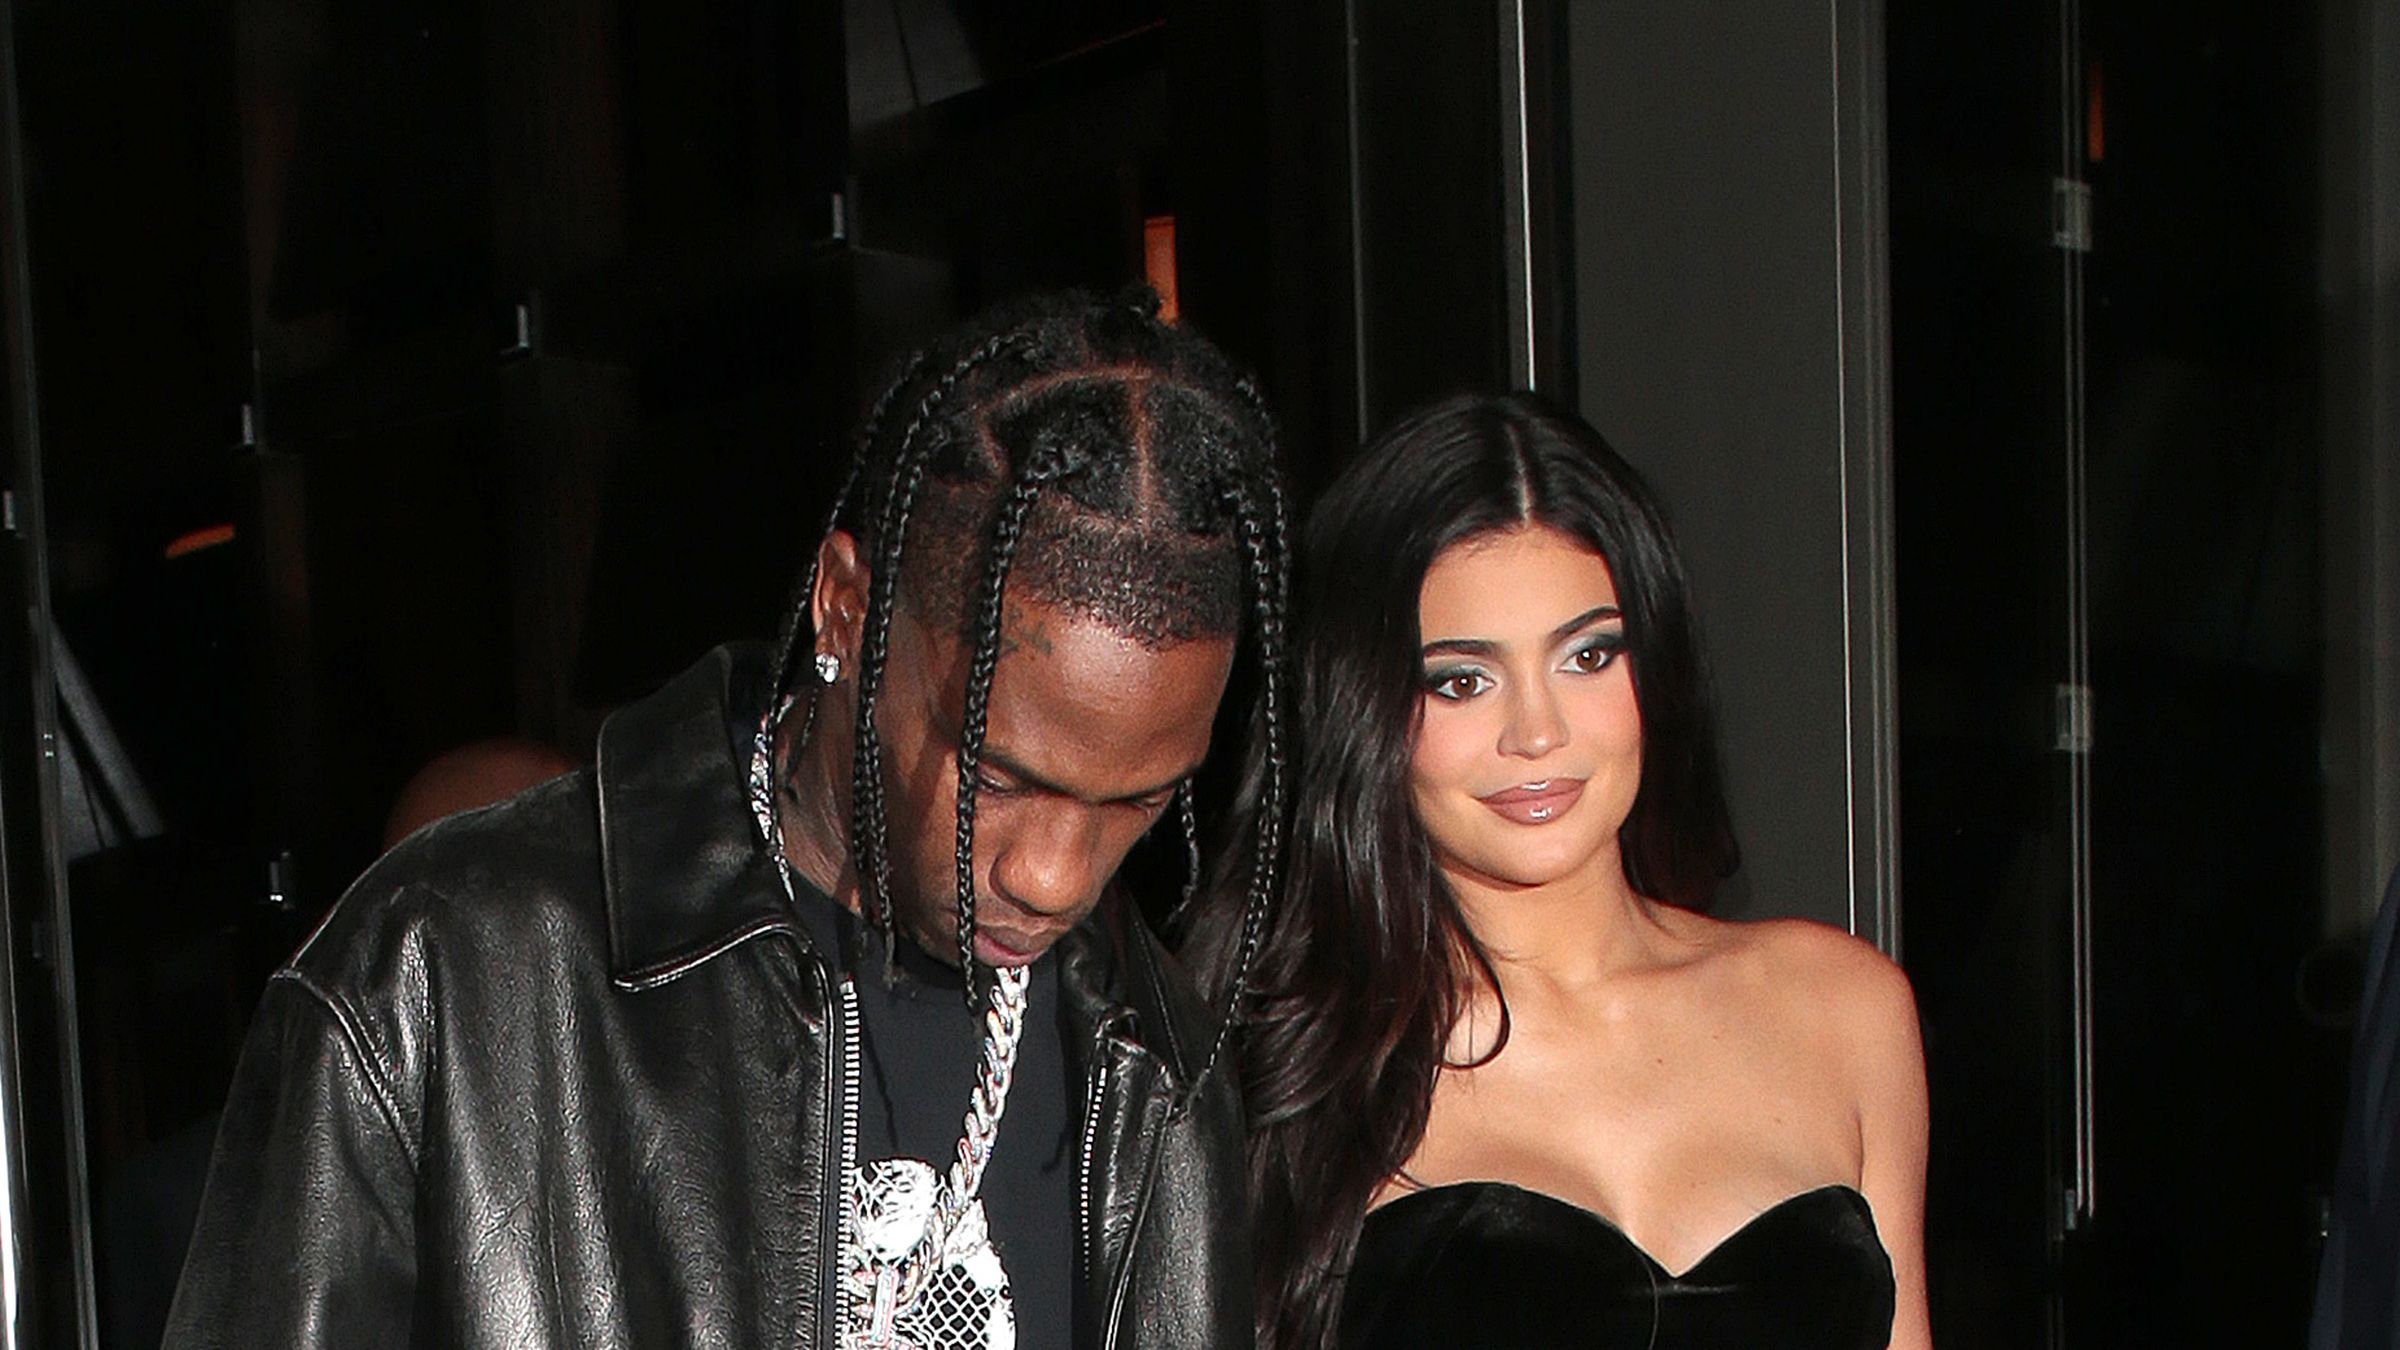 Travis Scott Does His Thing - The Hollywood Gossip